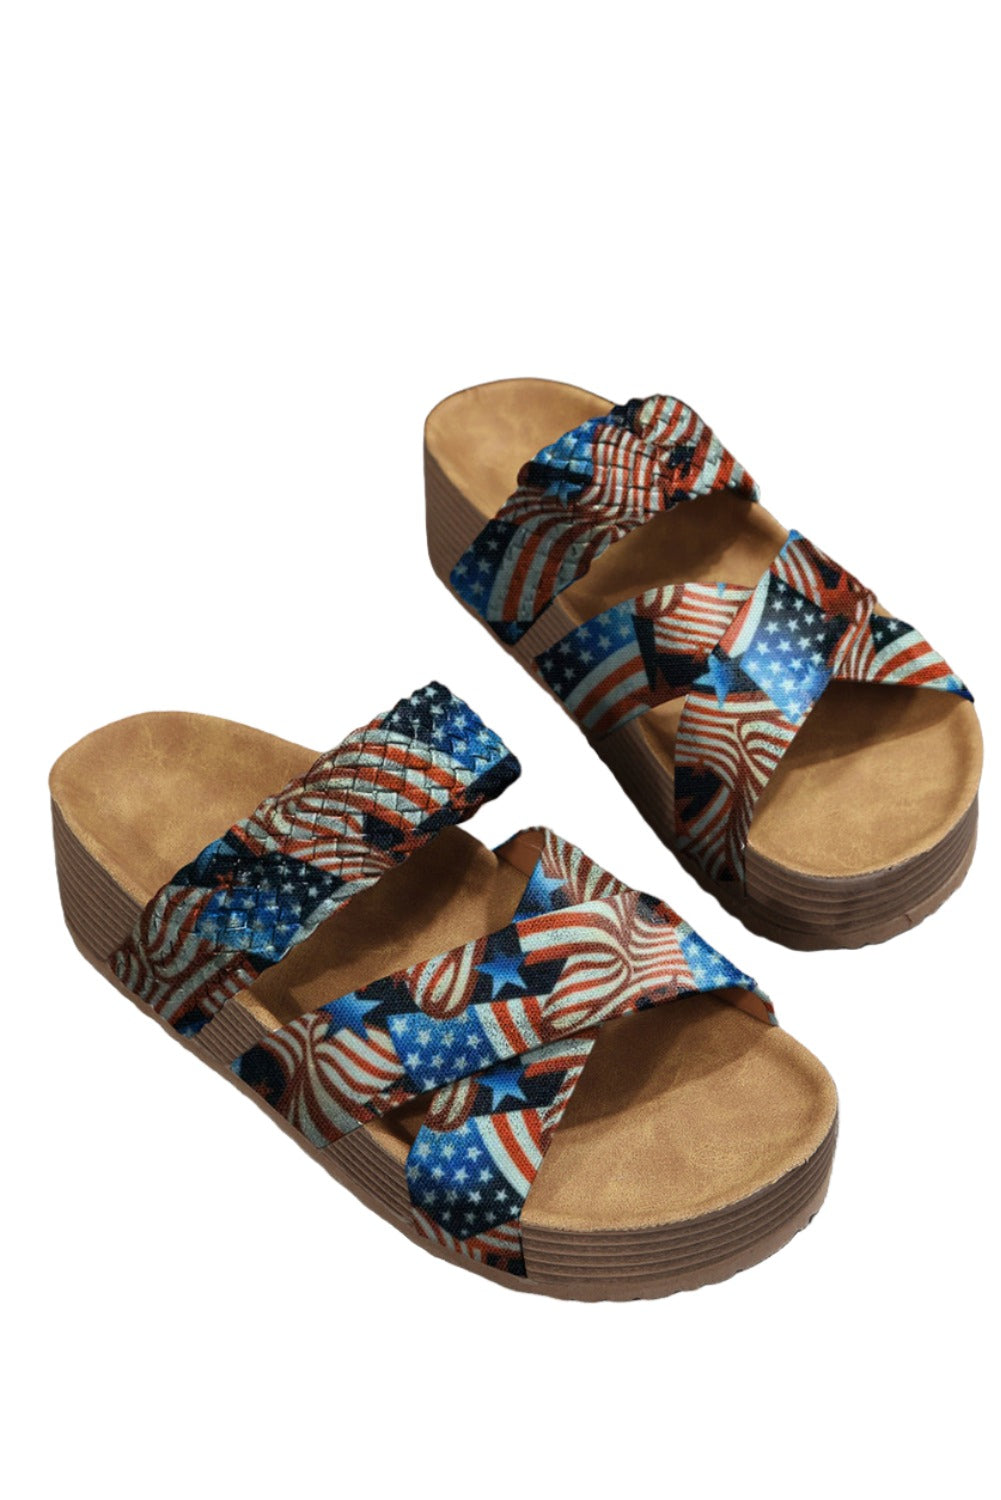 Real Teal American Flag Print Suede Cross Straps Slides Shoes